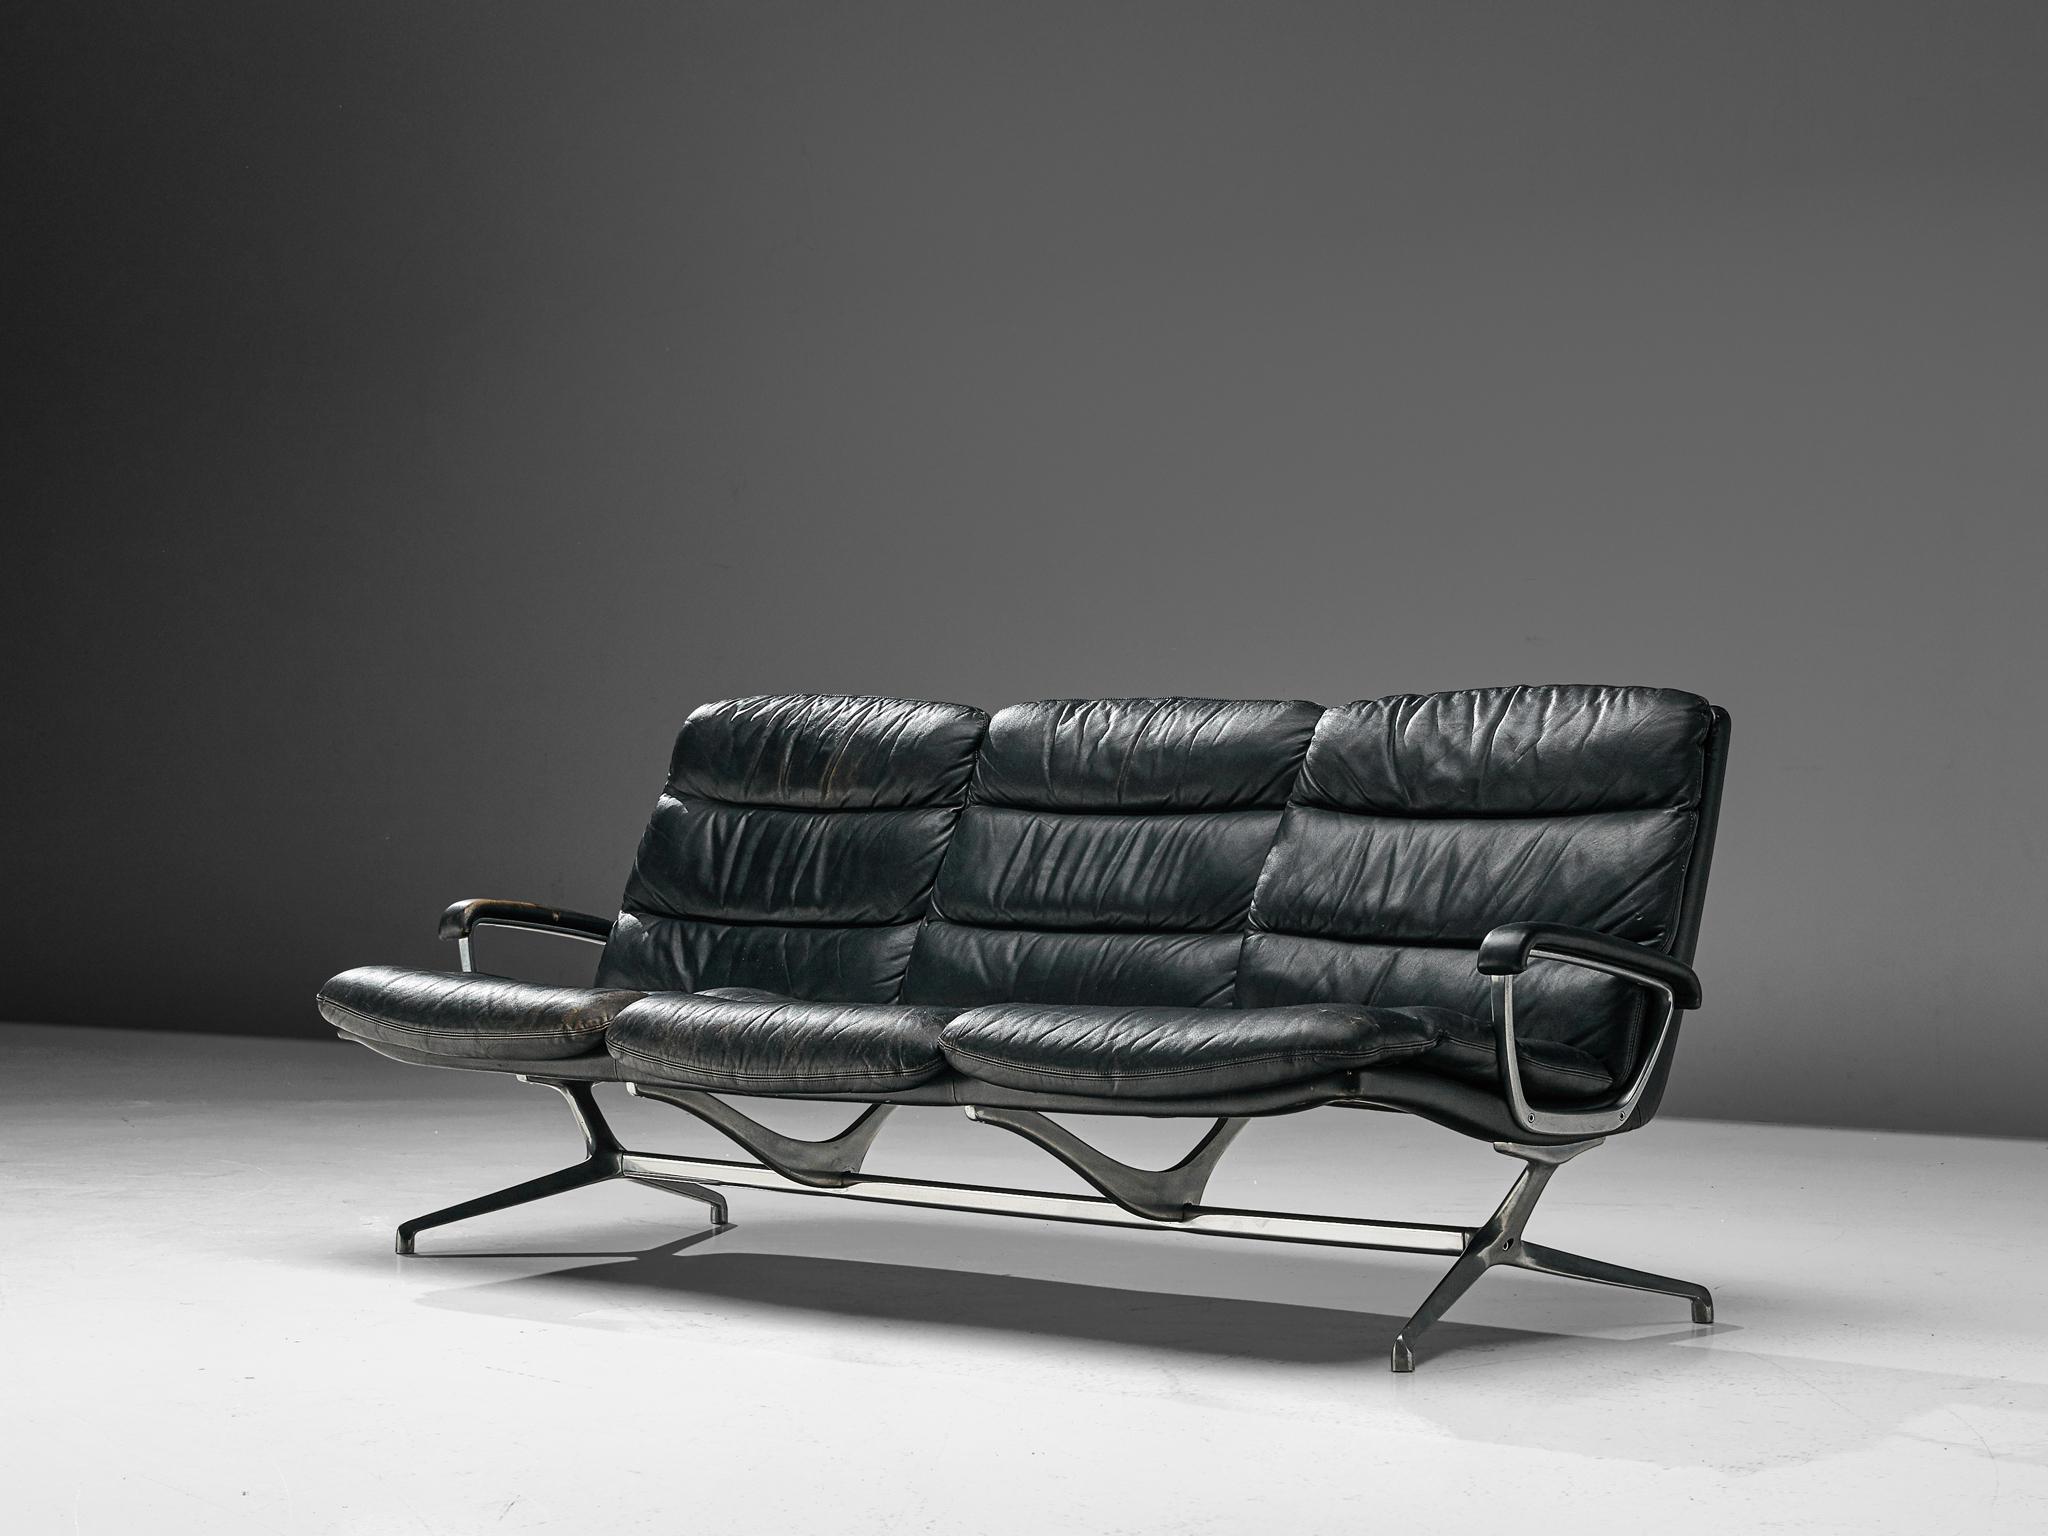 Paul Tuttle, three-seat sofa, for Strässle International, leather and cast aluminium, Switzerland, 1960s.

This sofa designed by Paul Tuttle is upholstered in black leather and has a striking aluminium frame an armrests, giving the sofa a very